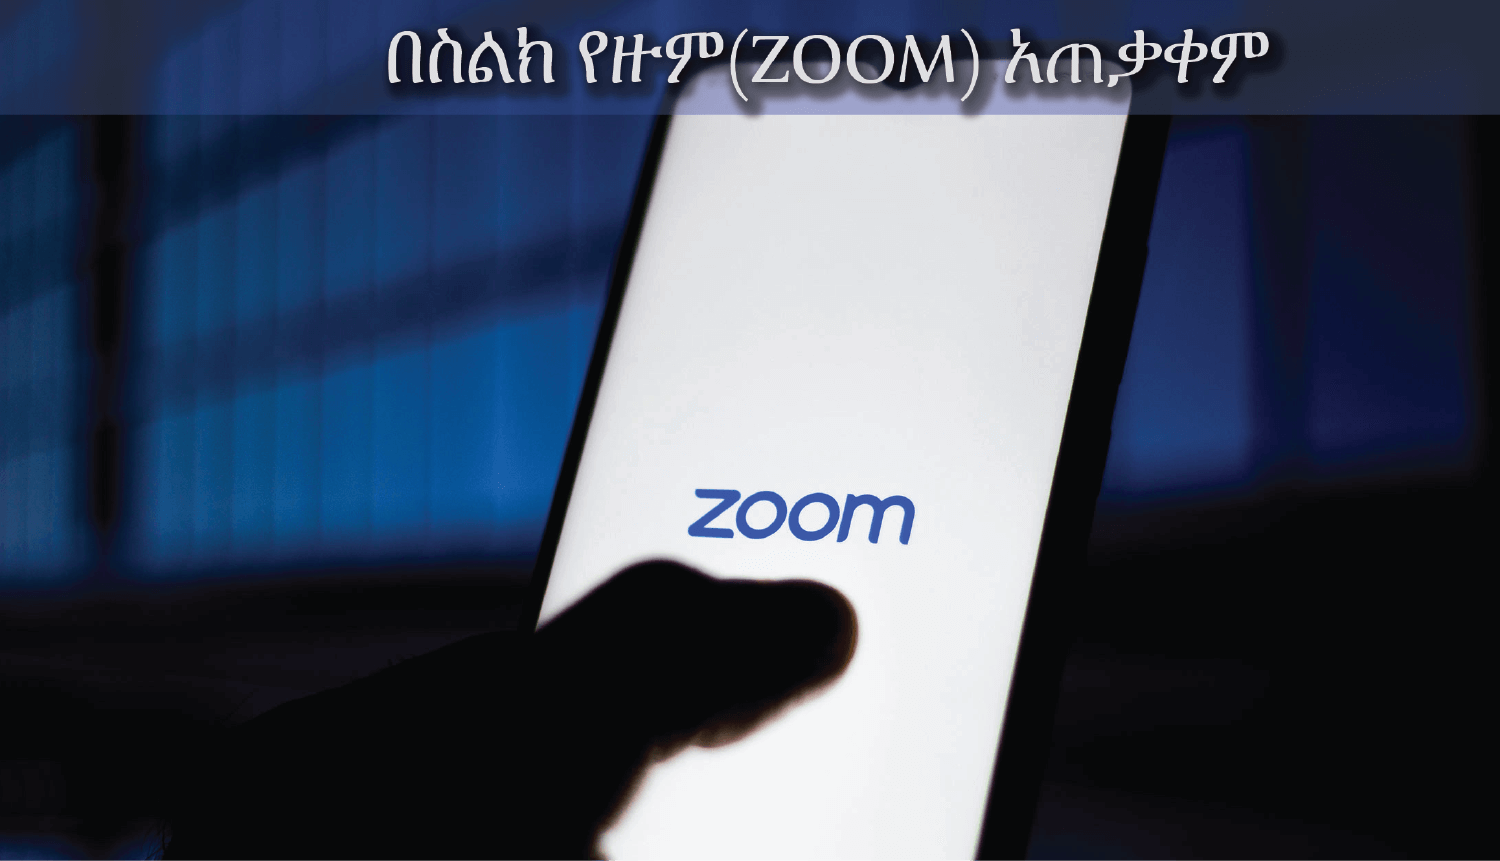 How To Use Zoom On Your Phone